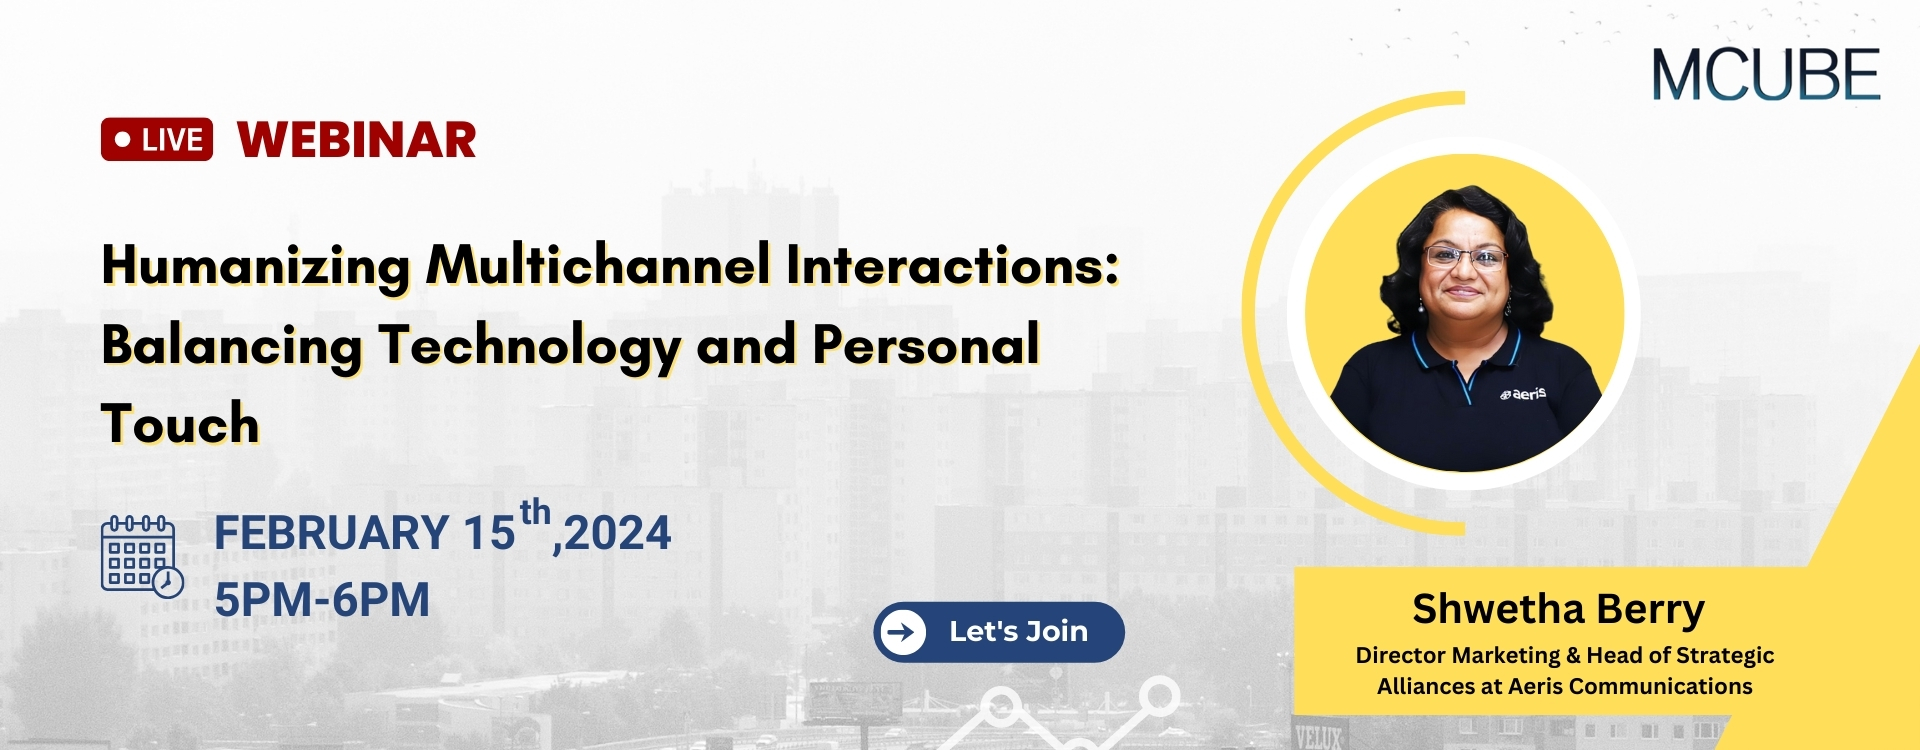 Humanizing Multichannel Interactions: Balancing Technology & Personal Touch, Online Event